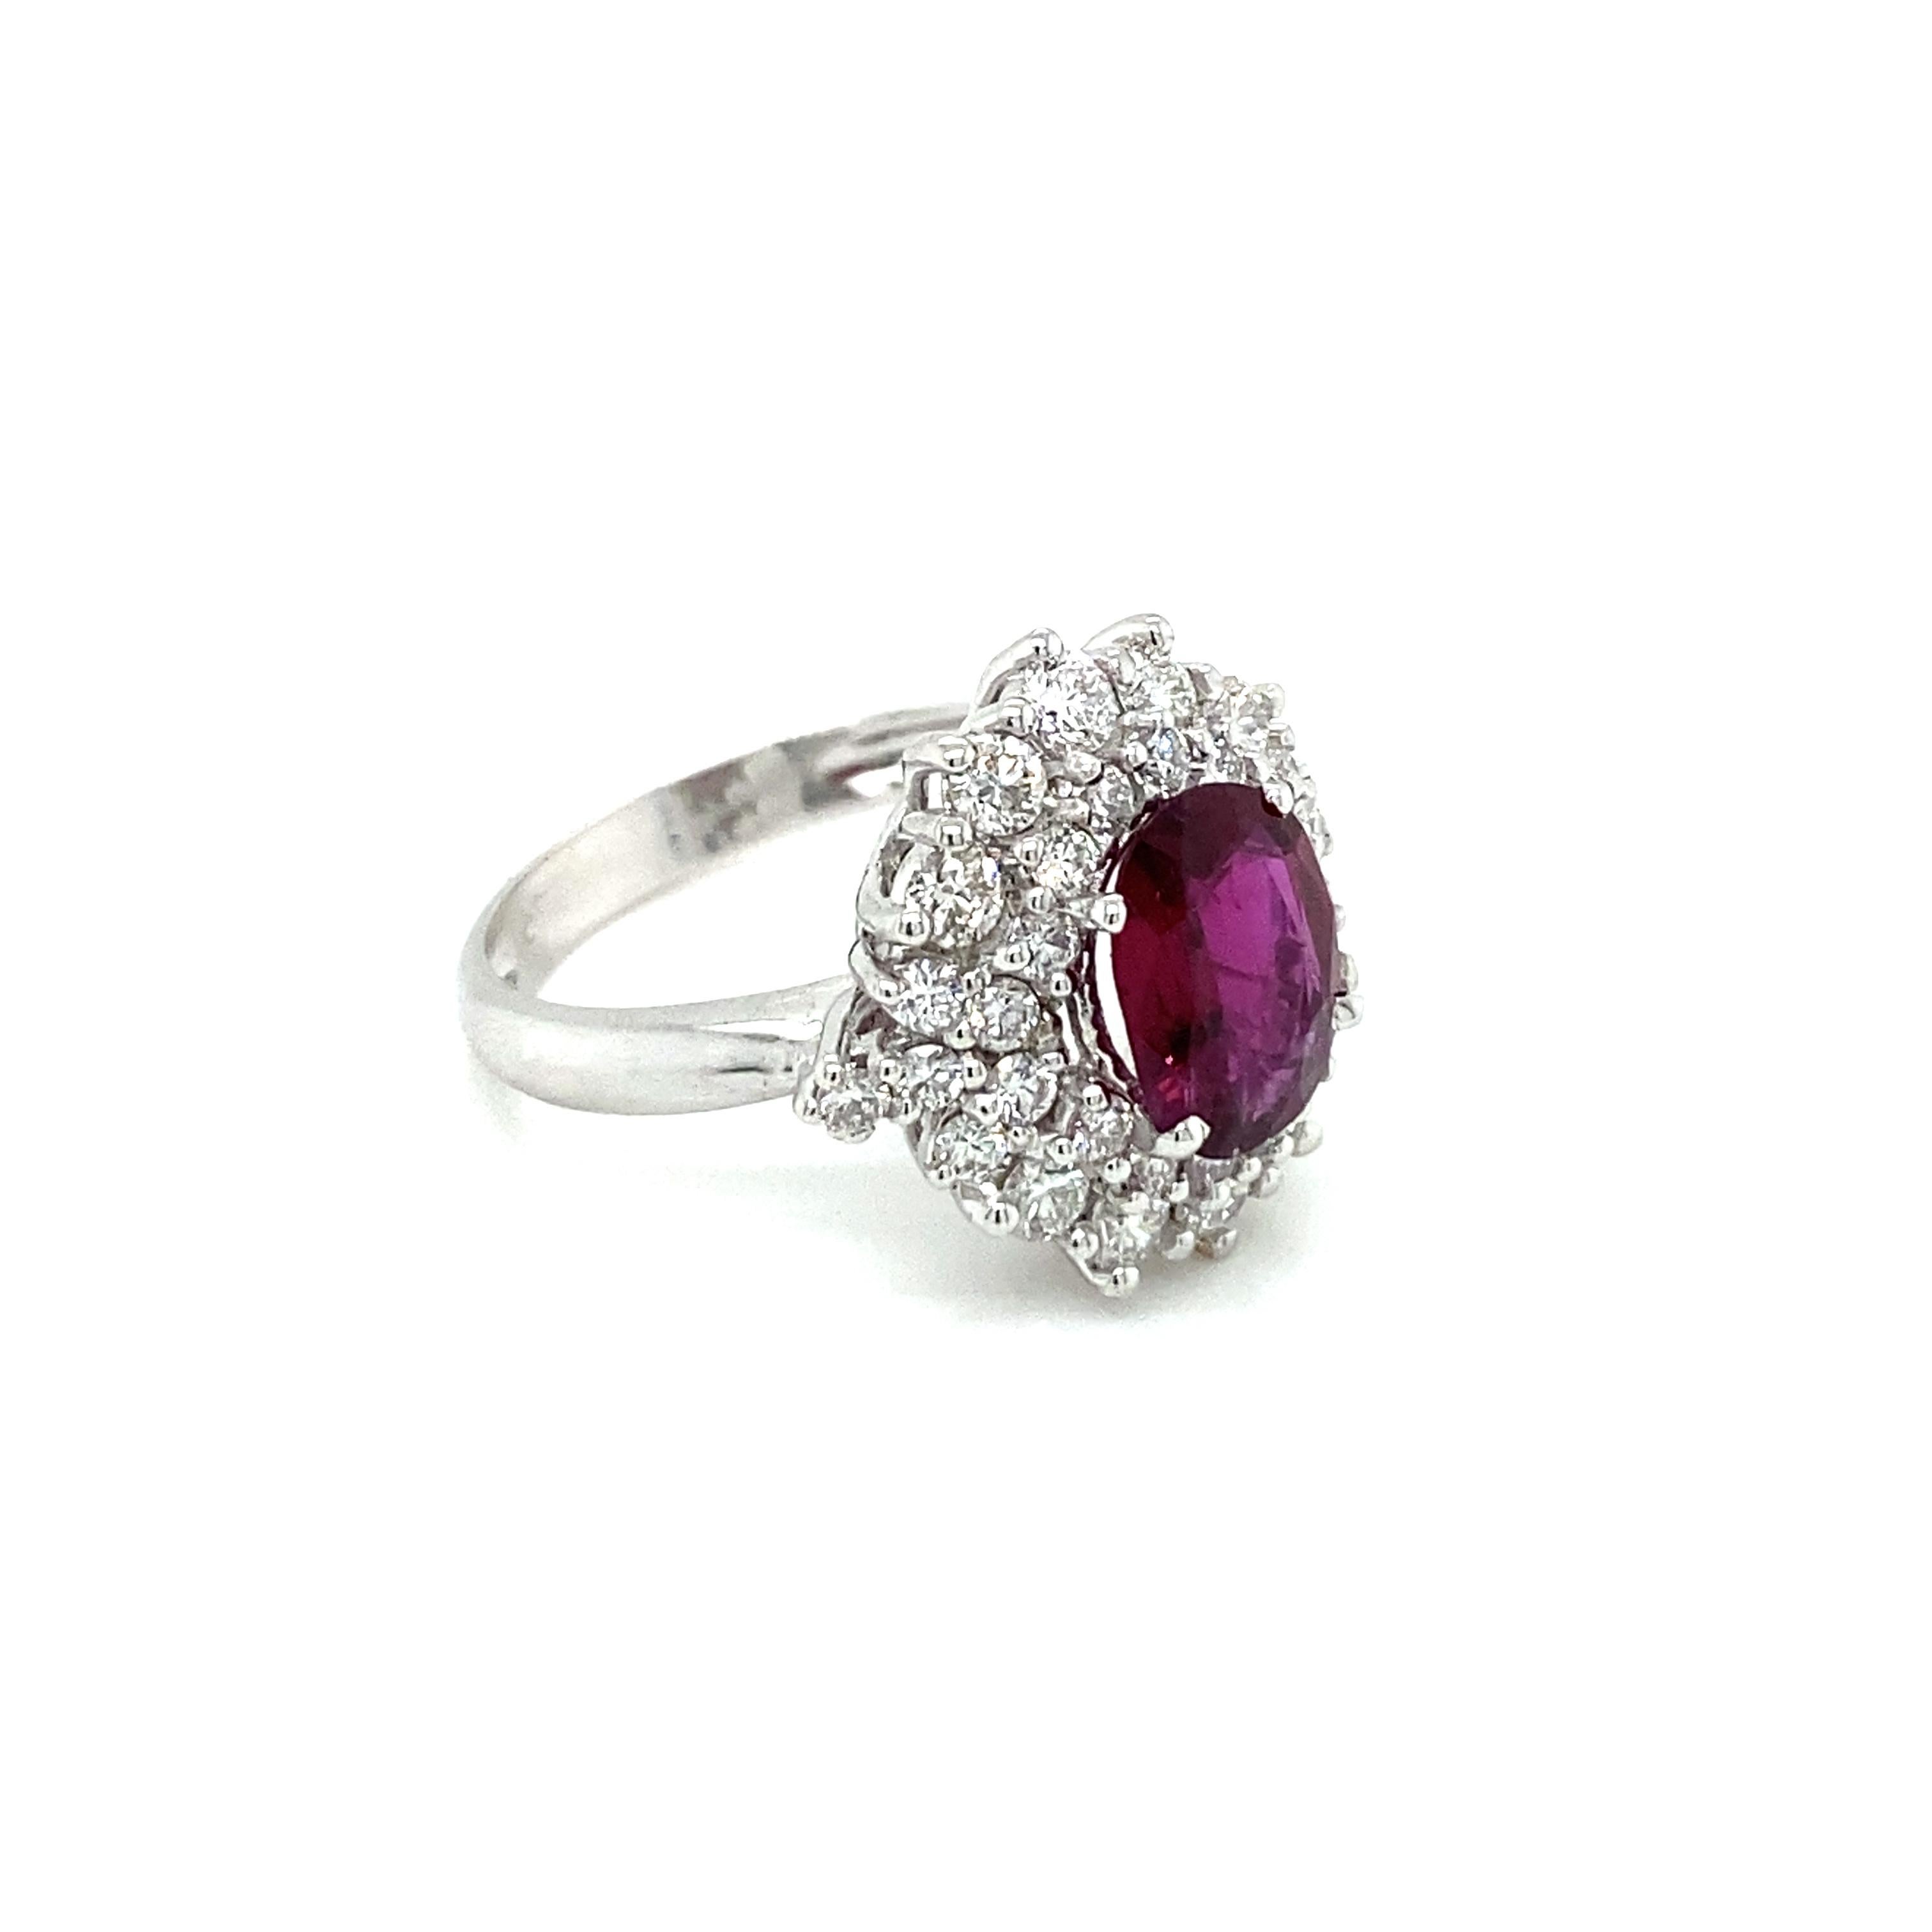 Women's Estate Certified 1.94 Carat Ruby Diamond Cluster Ring For Sale